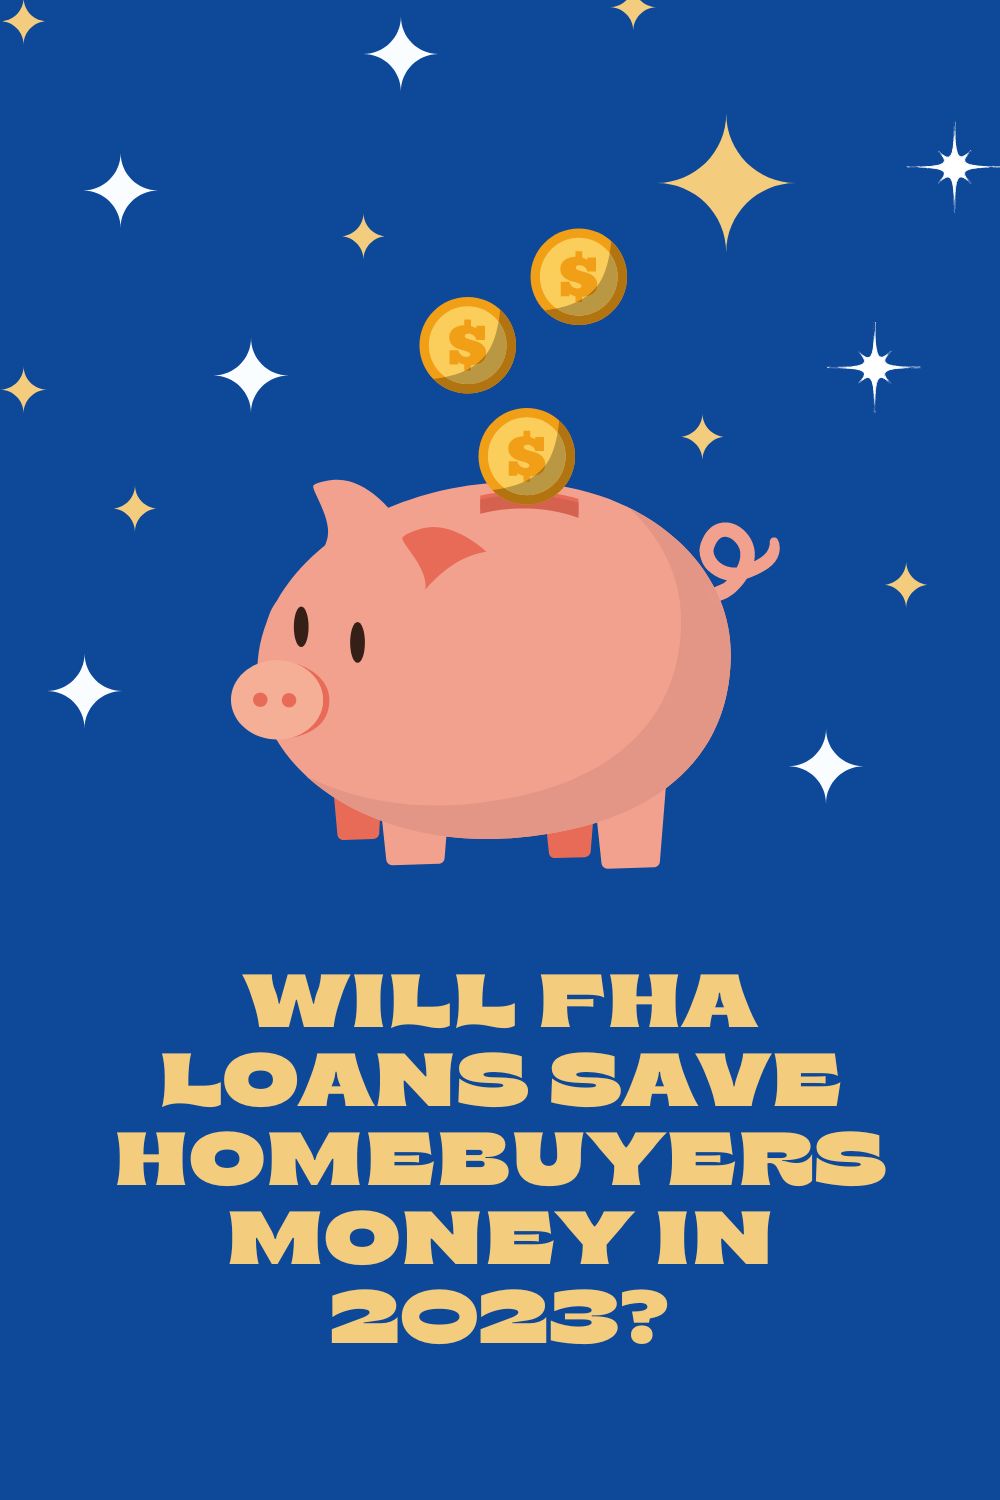 Will FHA Loans Save Homebuyers Money in 2023?